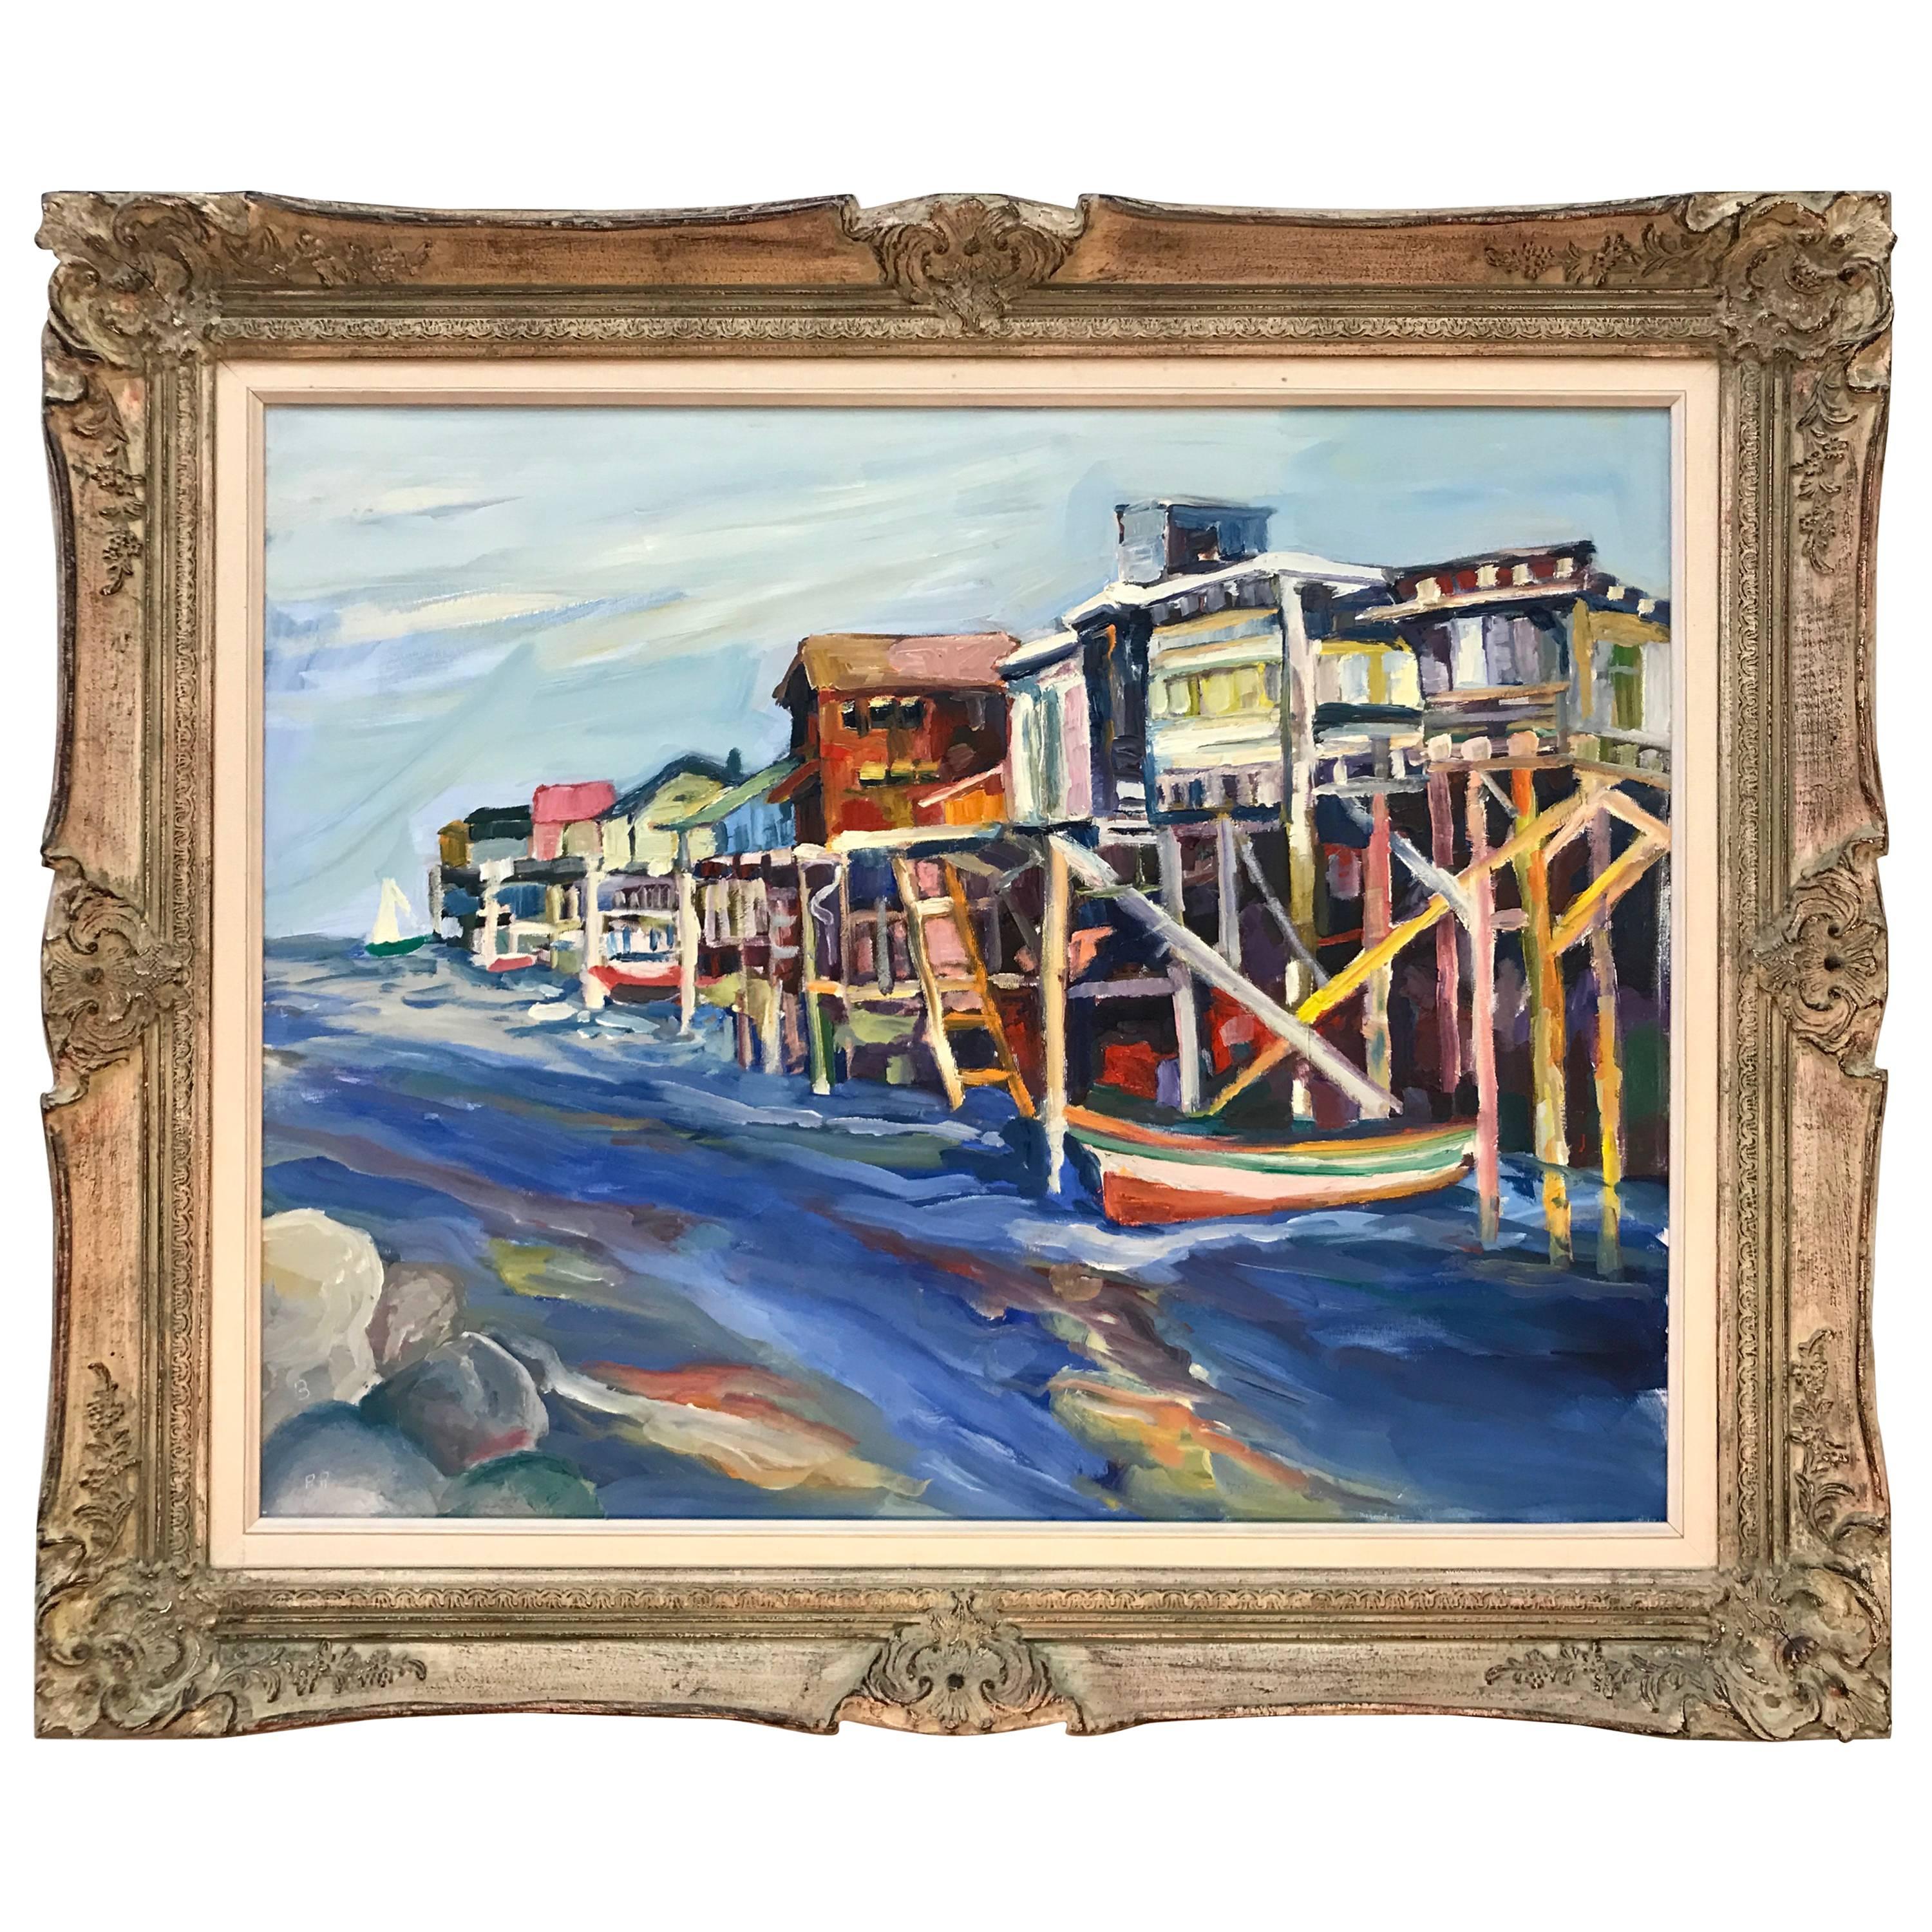 Jane Bradford “View of Cannery Row” Oil Painting, Signed